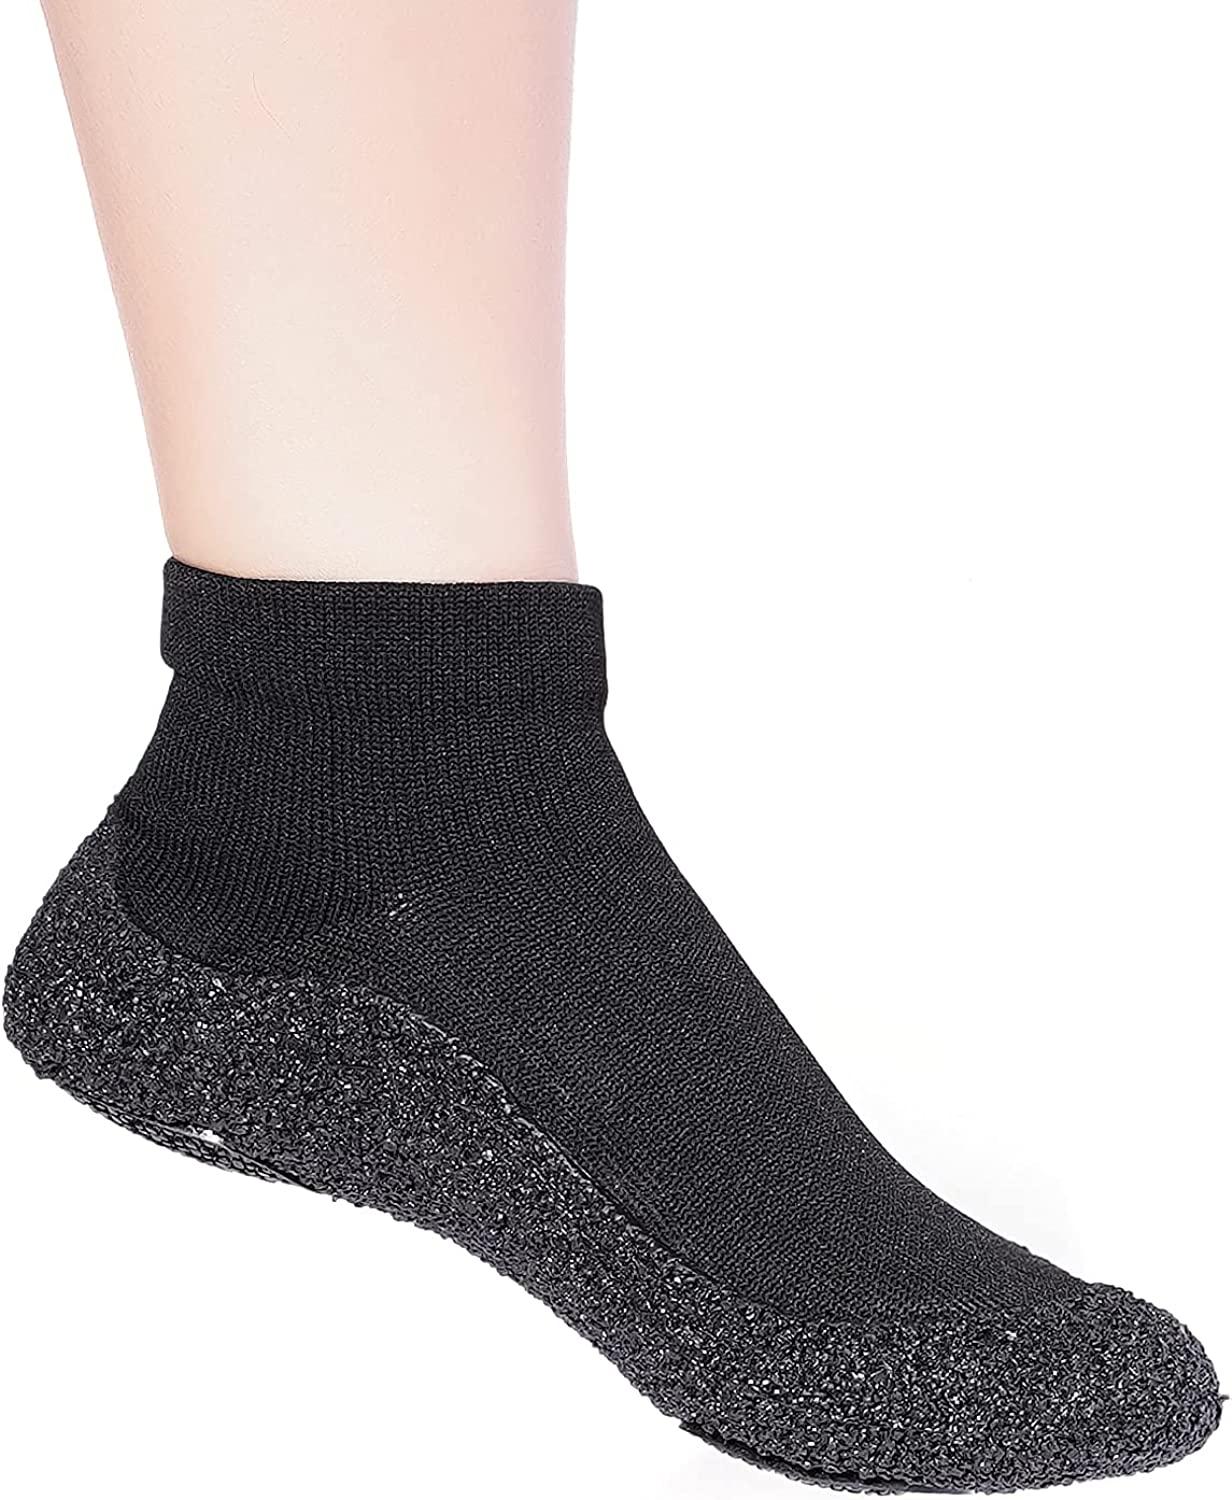 WHITIN Minimalist Barefoot Sock Shoes for Women and Men Eco